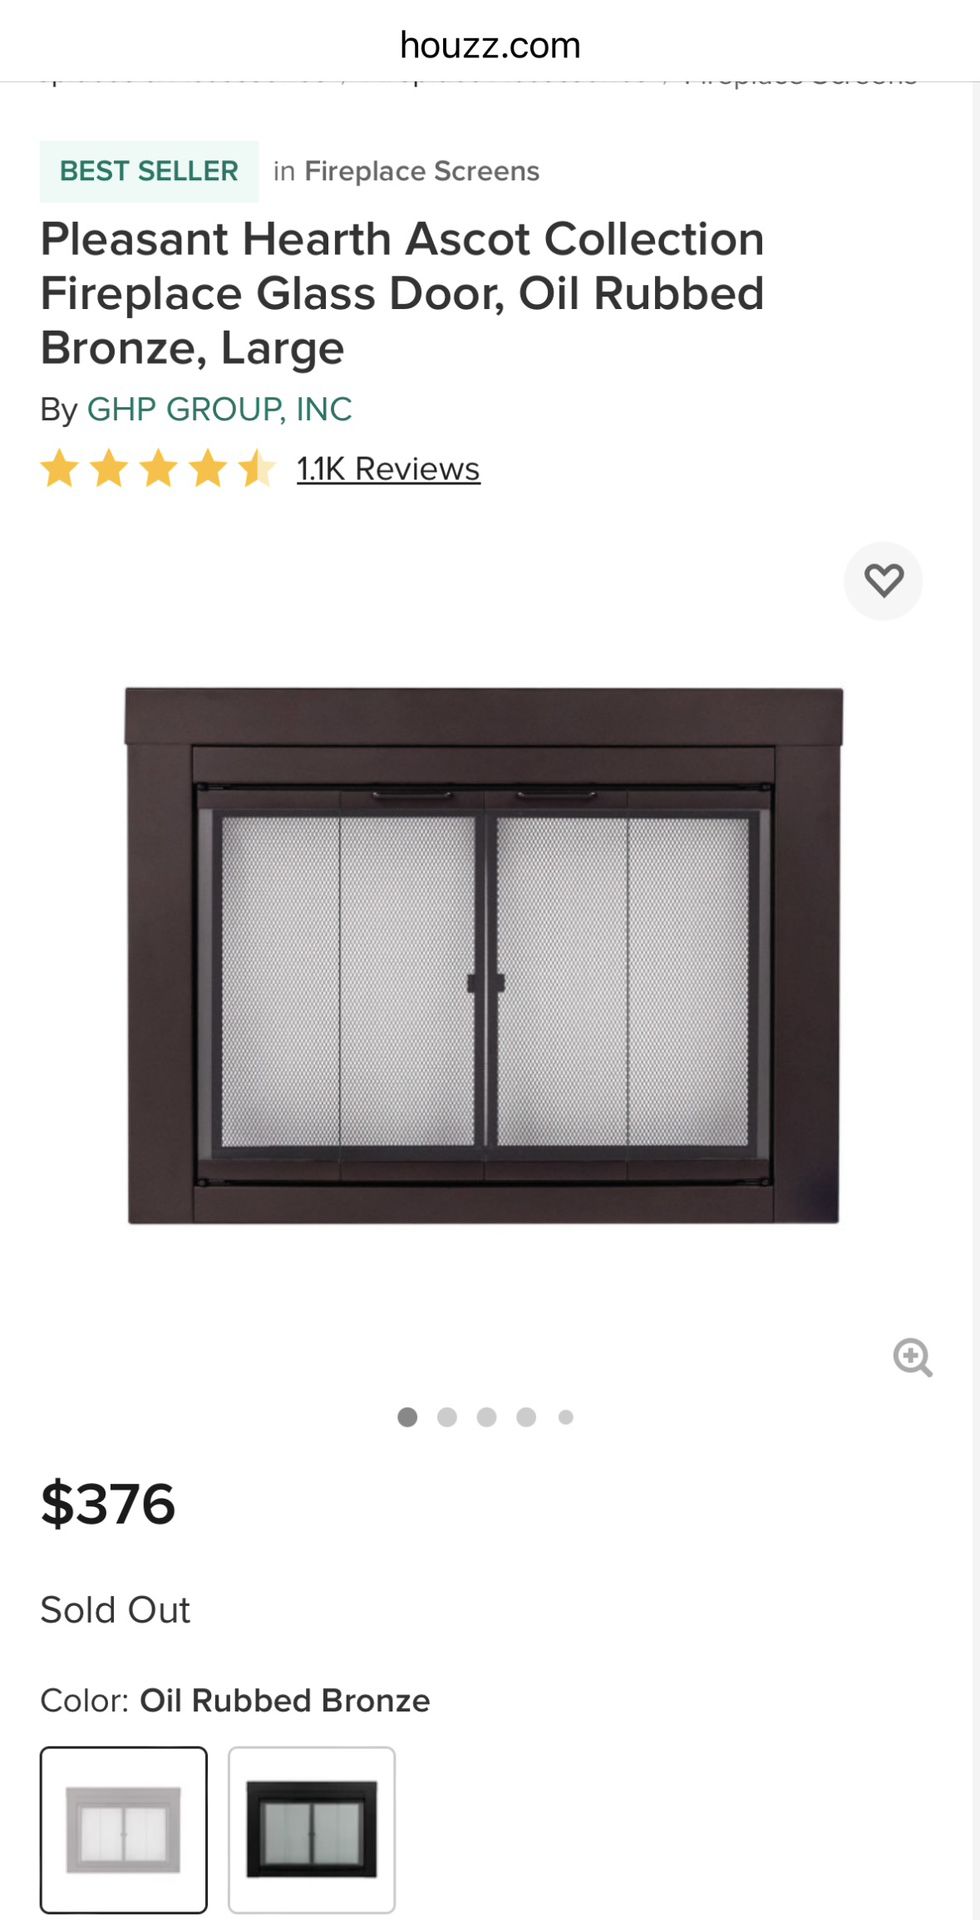 Pleasant Hearth Ascot Collection Fireplace Glass Door, Oil Rubbed Bronze, Large (BRAND NEW. IN BOX)